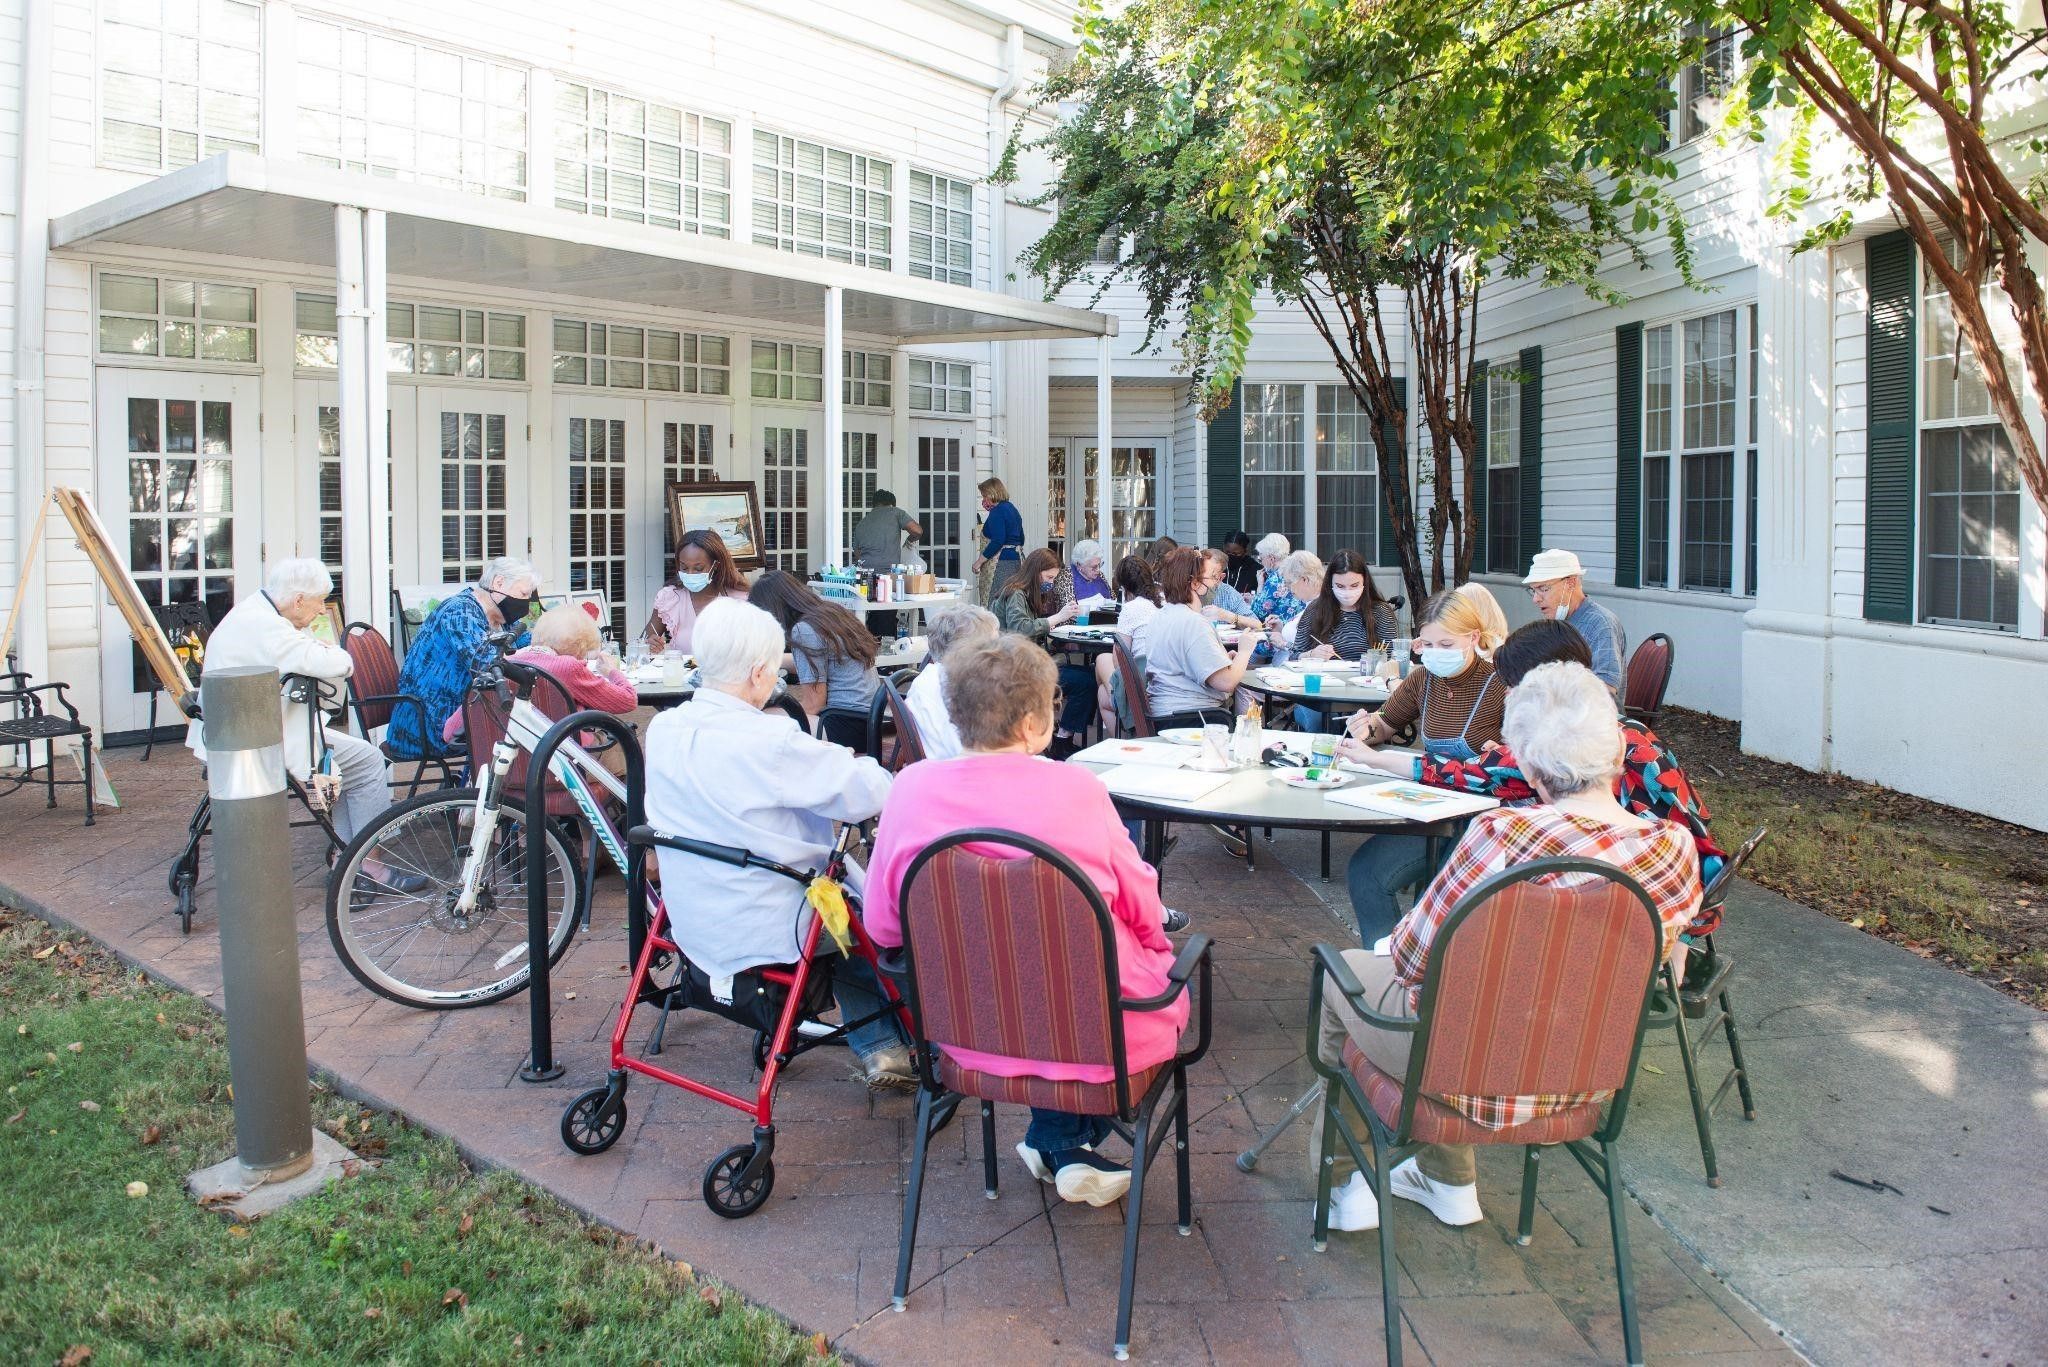  A group of college students and residents of the College Square Retirement Community gather at tables filled with art supplies.